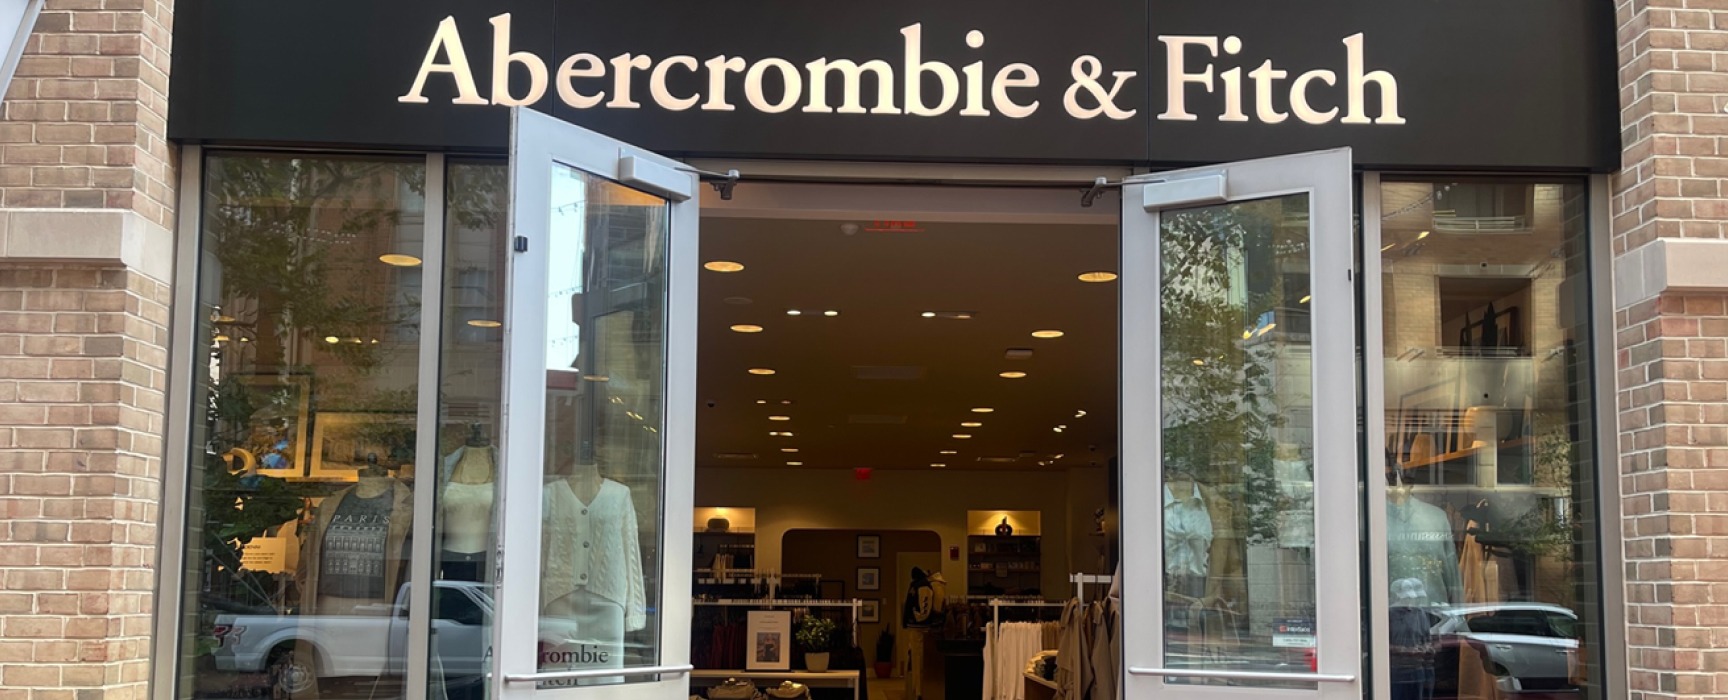 Abercrombie & Fitch displayed prominently on the entryway of the clothing store in Harbor East